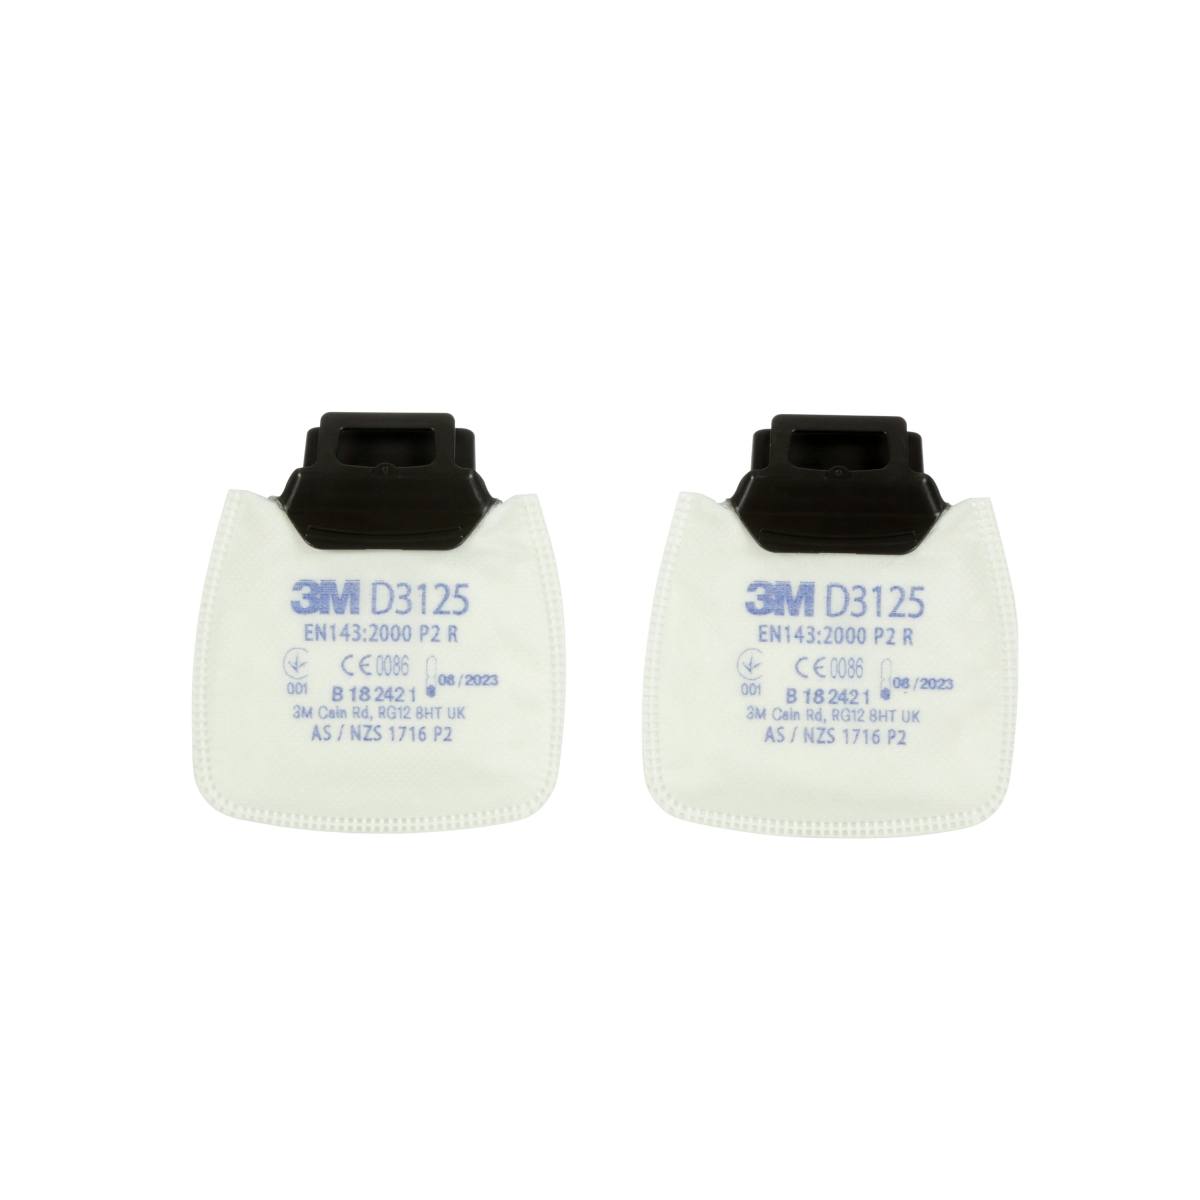 3M Secure Click D3125, P2 R Particle filter against solid and liquid particles